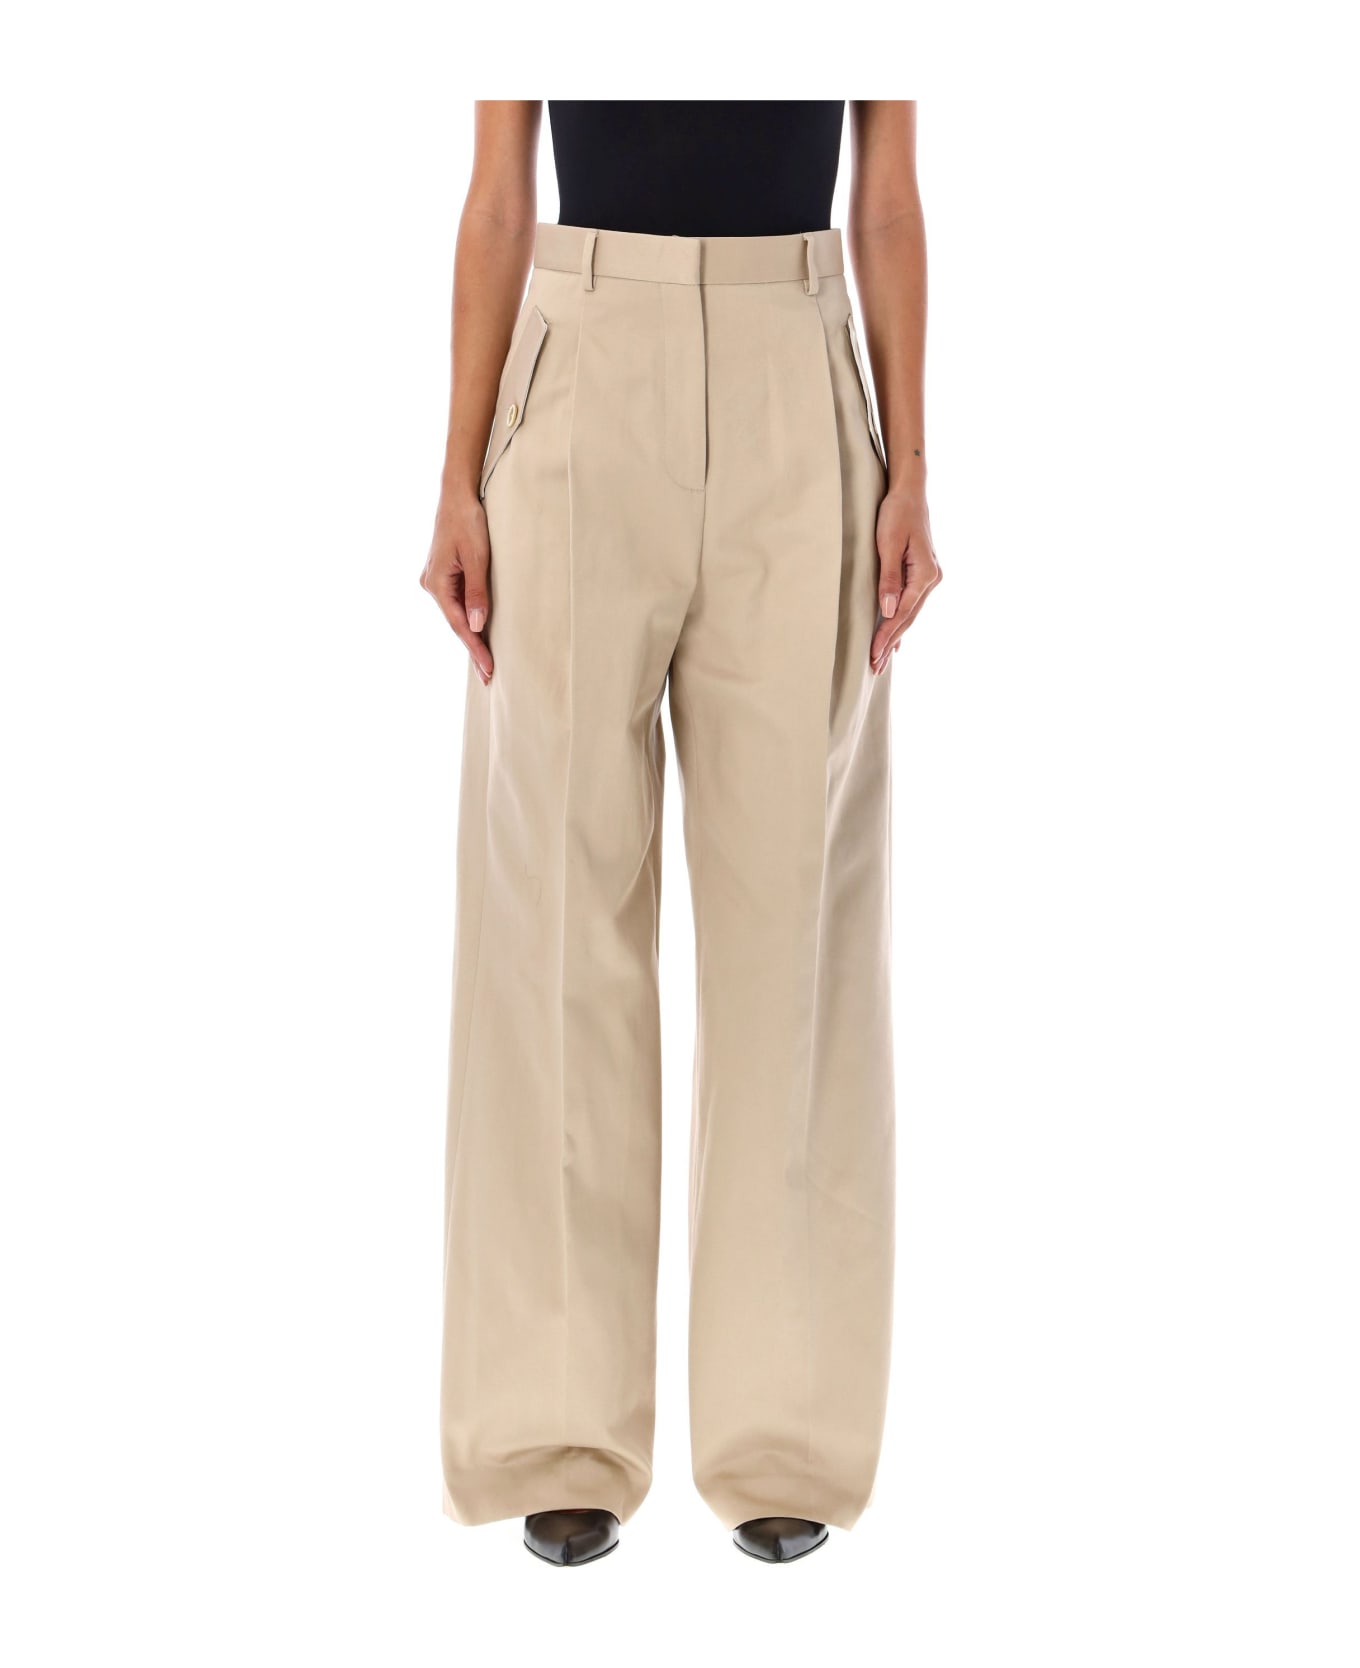 Lanvin Flared Chino Pants - BEIGE